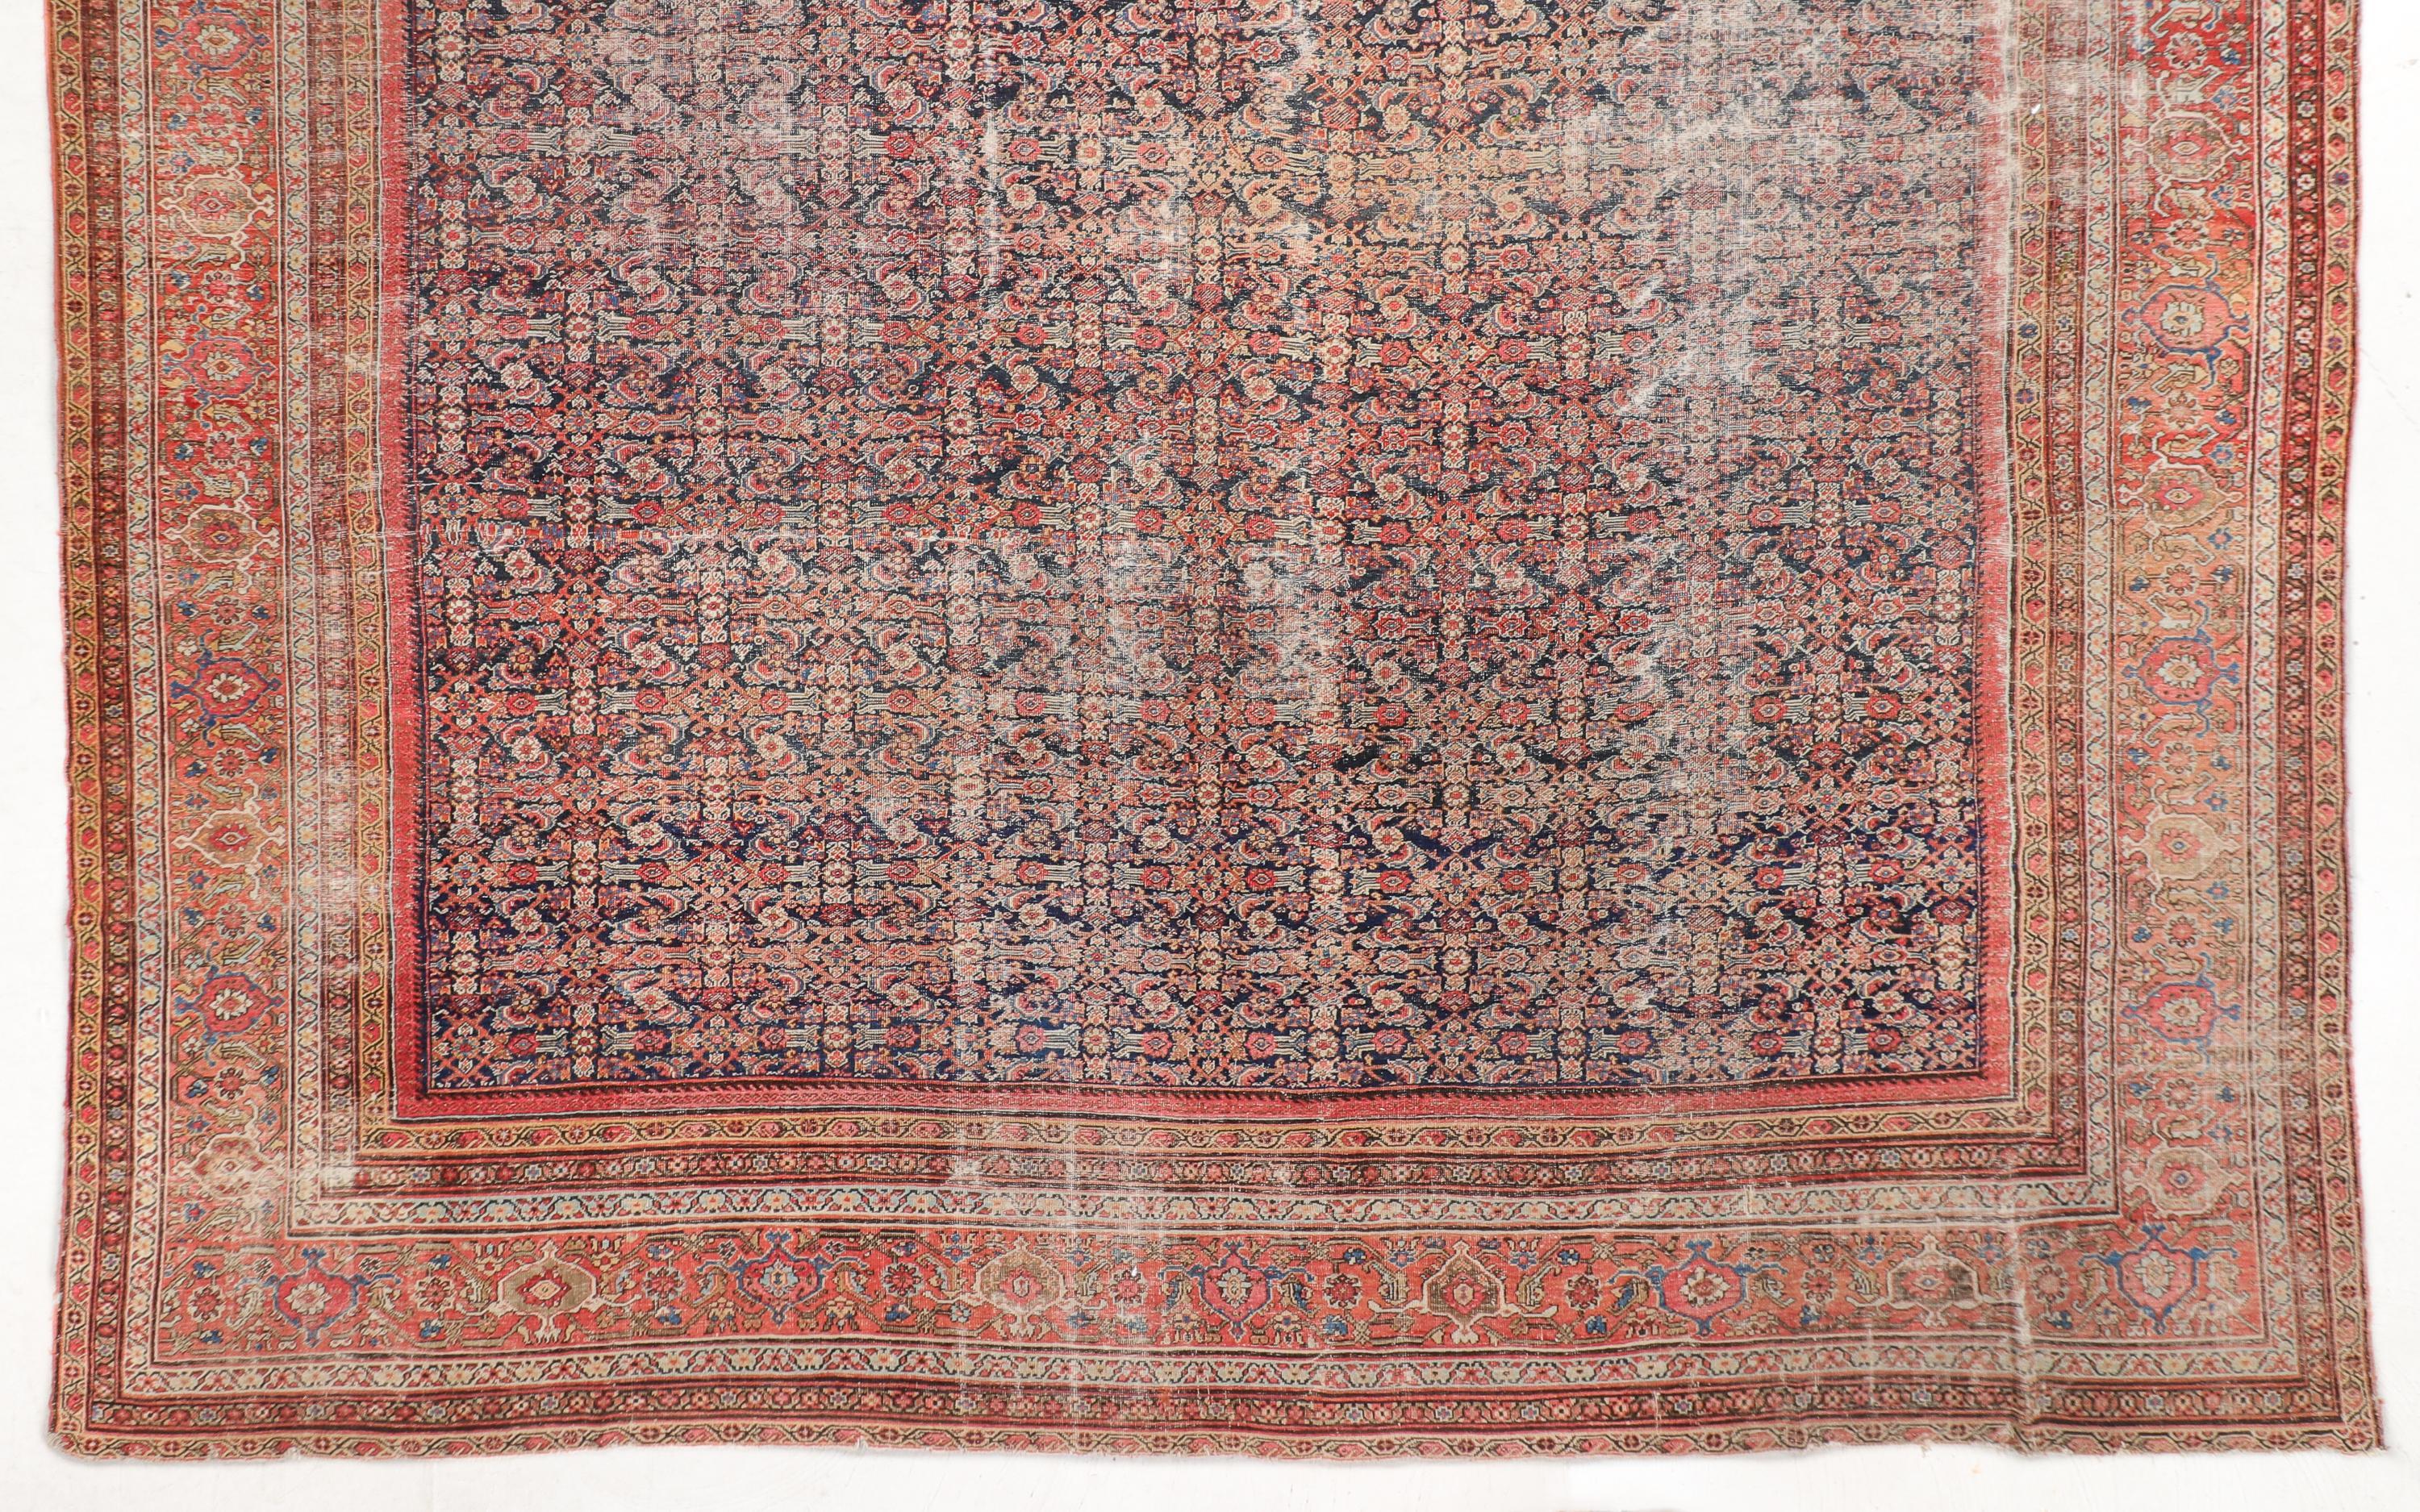 Early 20th Century Palace Size Gorgeous Antique Sultanabad Rug 16x24 CIrca 1900s For Sale